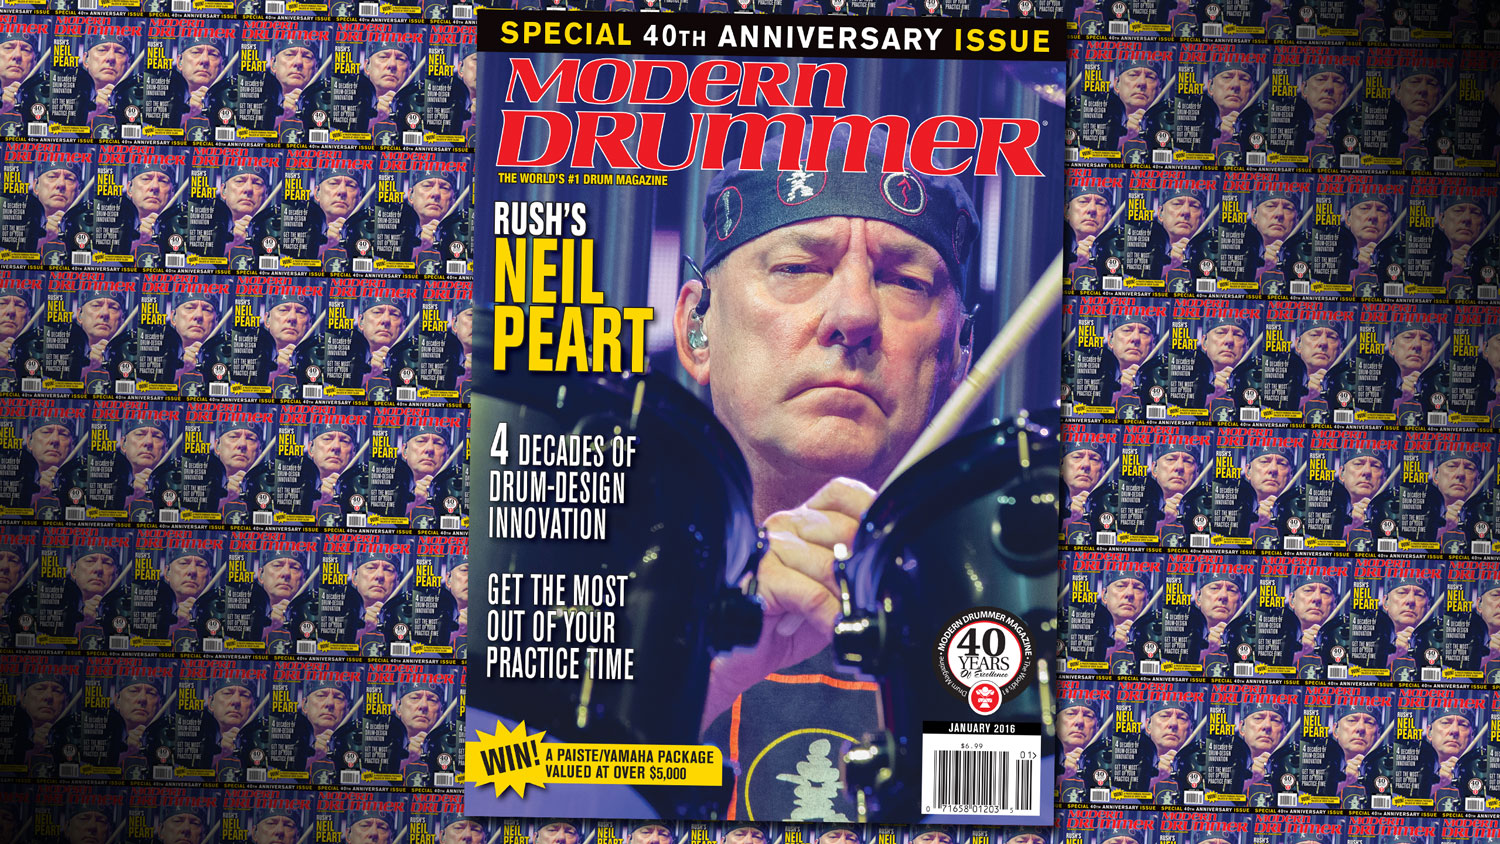 January 2016 Issue of Modern Drummer featuring NEIL PEART